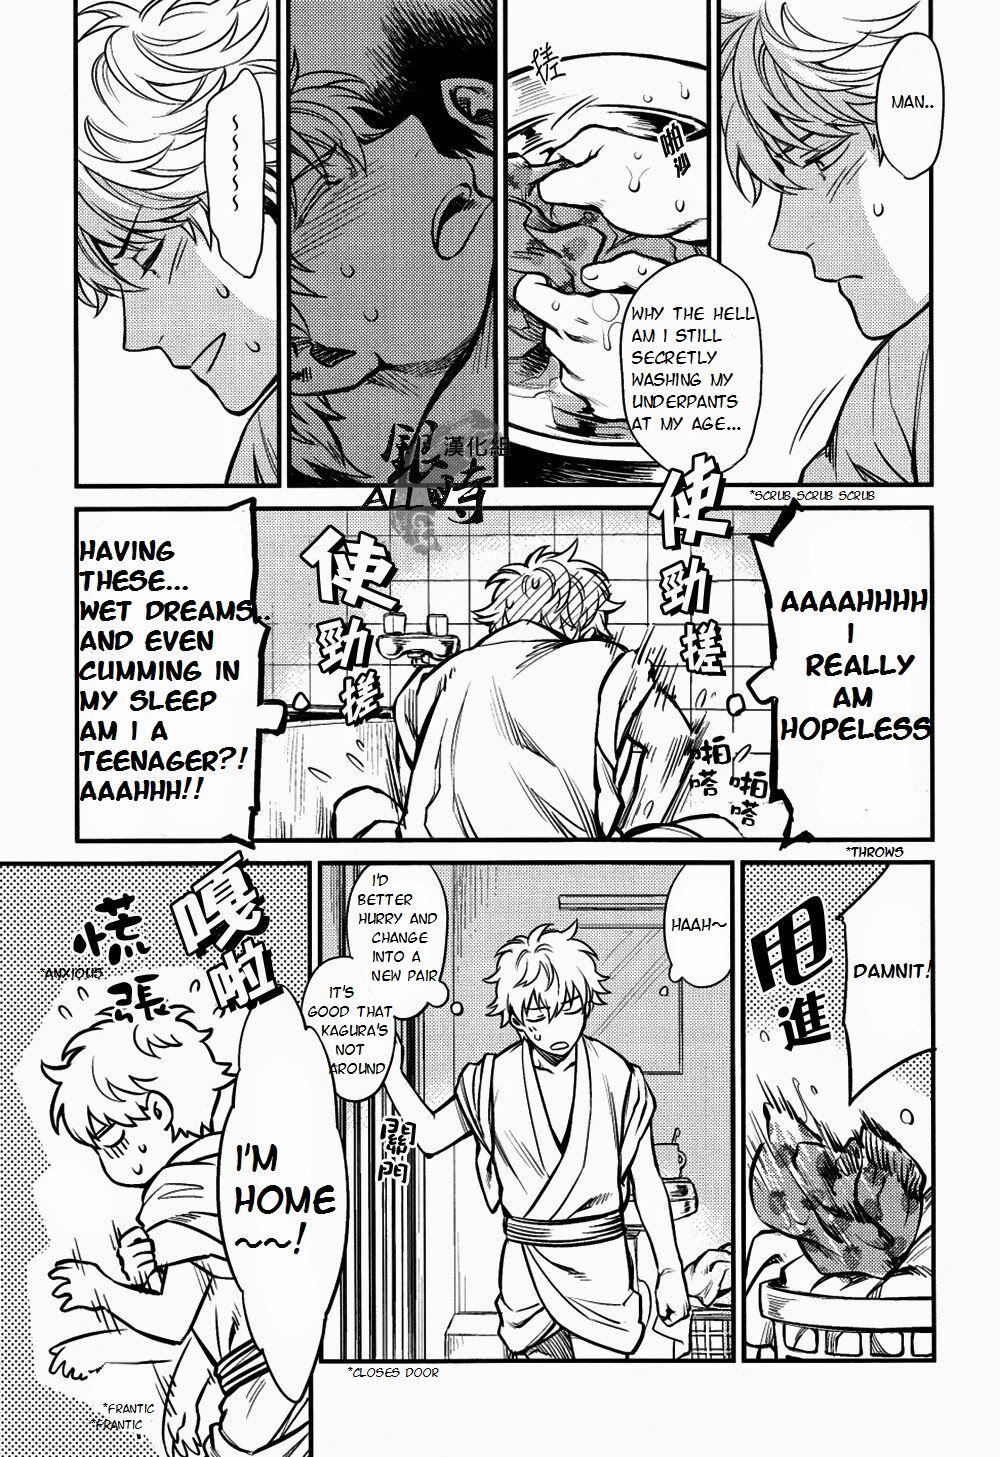 Swinger Please! Gintoki - Gintama And - Page 6